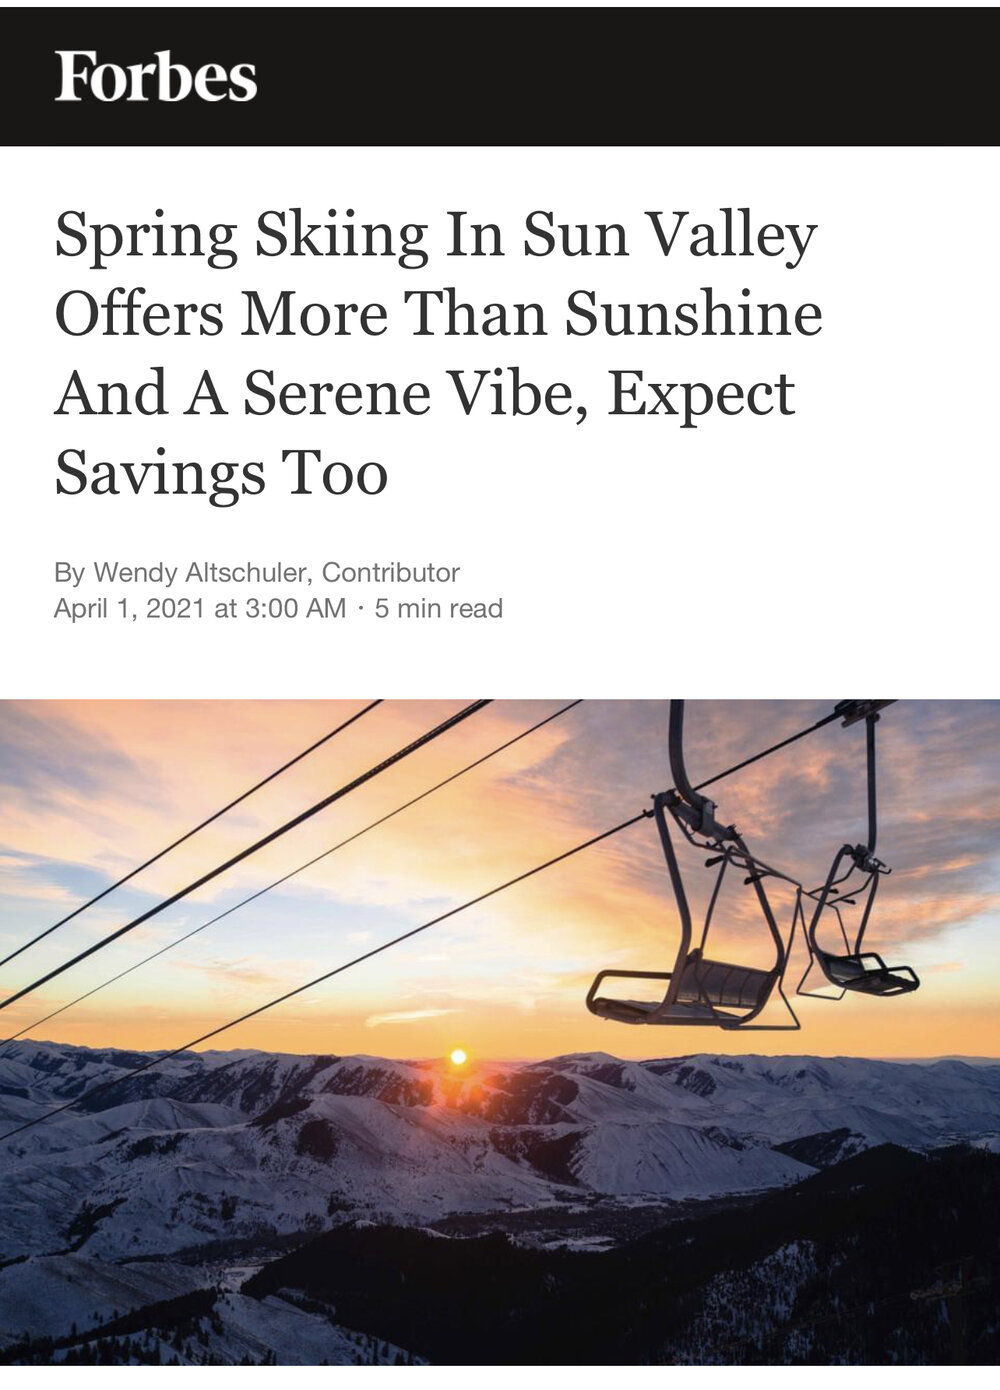 Spring Skiing In Sun Valley Offers More Than Sunshine And A Serene Vibe, Expect Savings Too